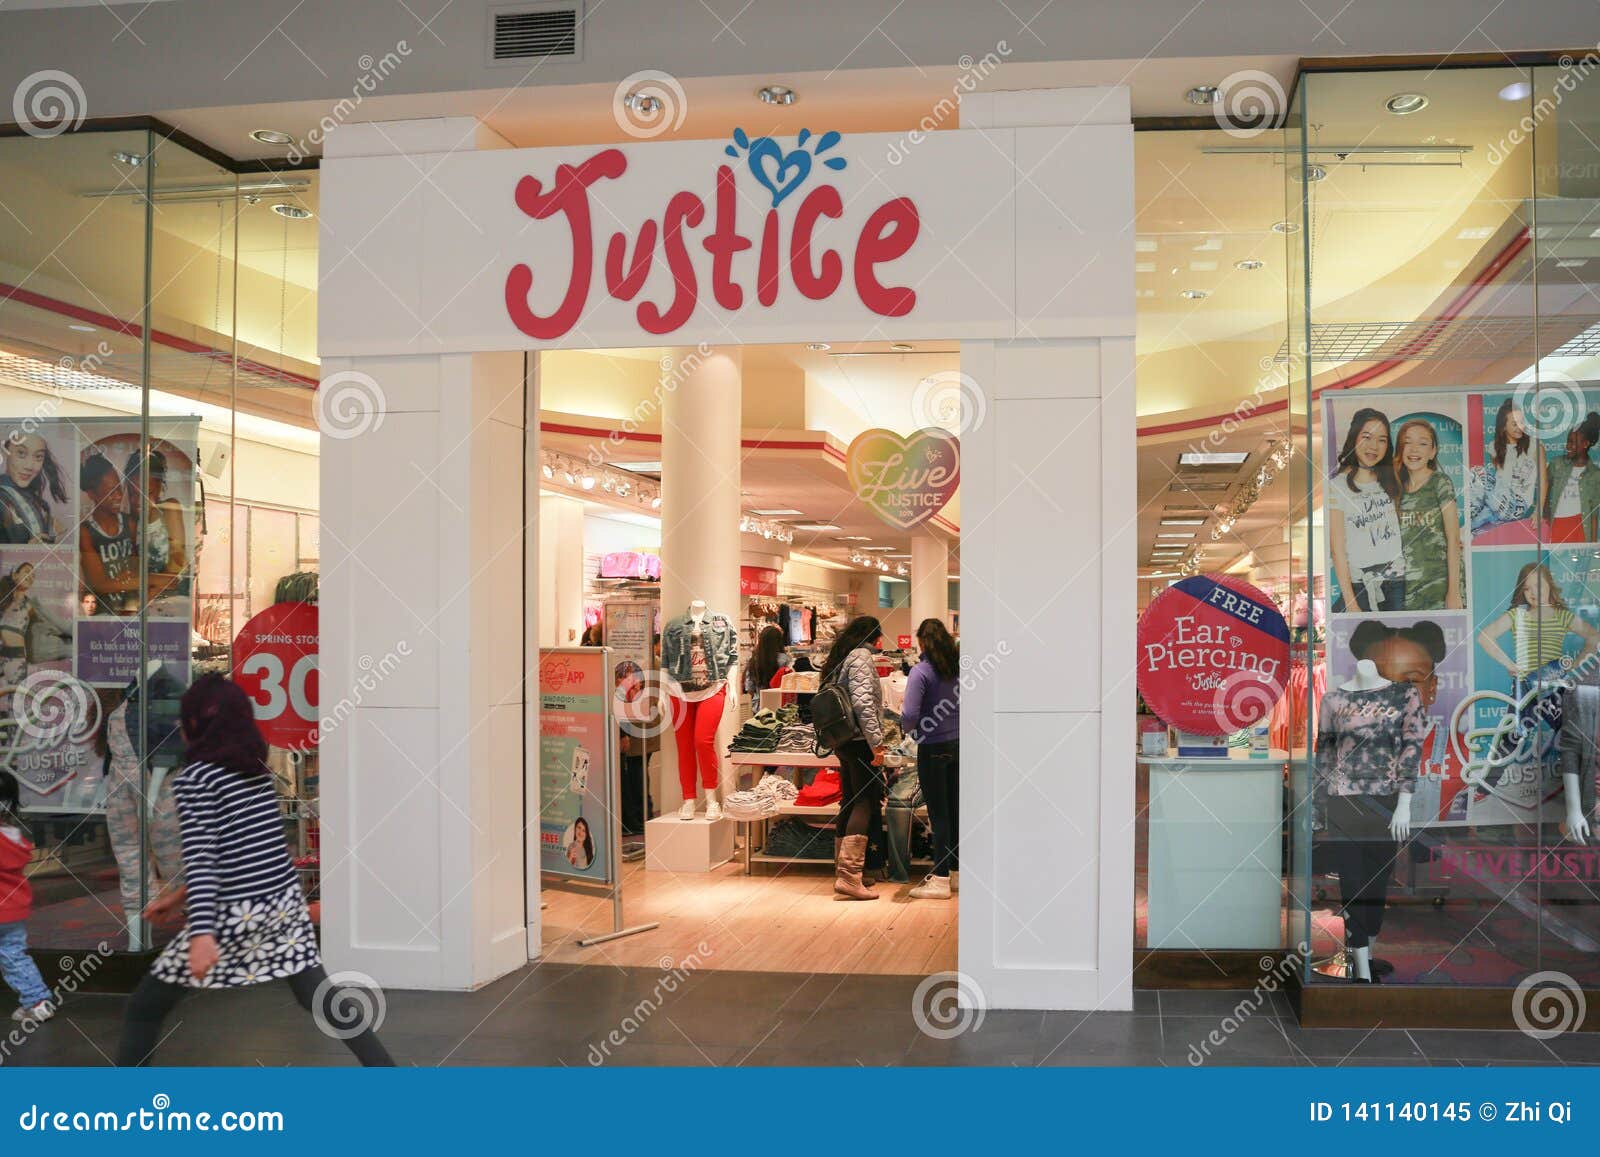 justice kid store